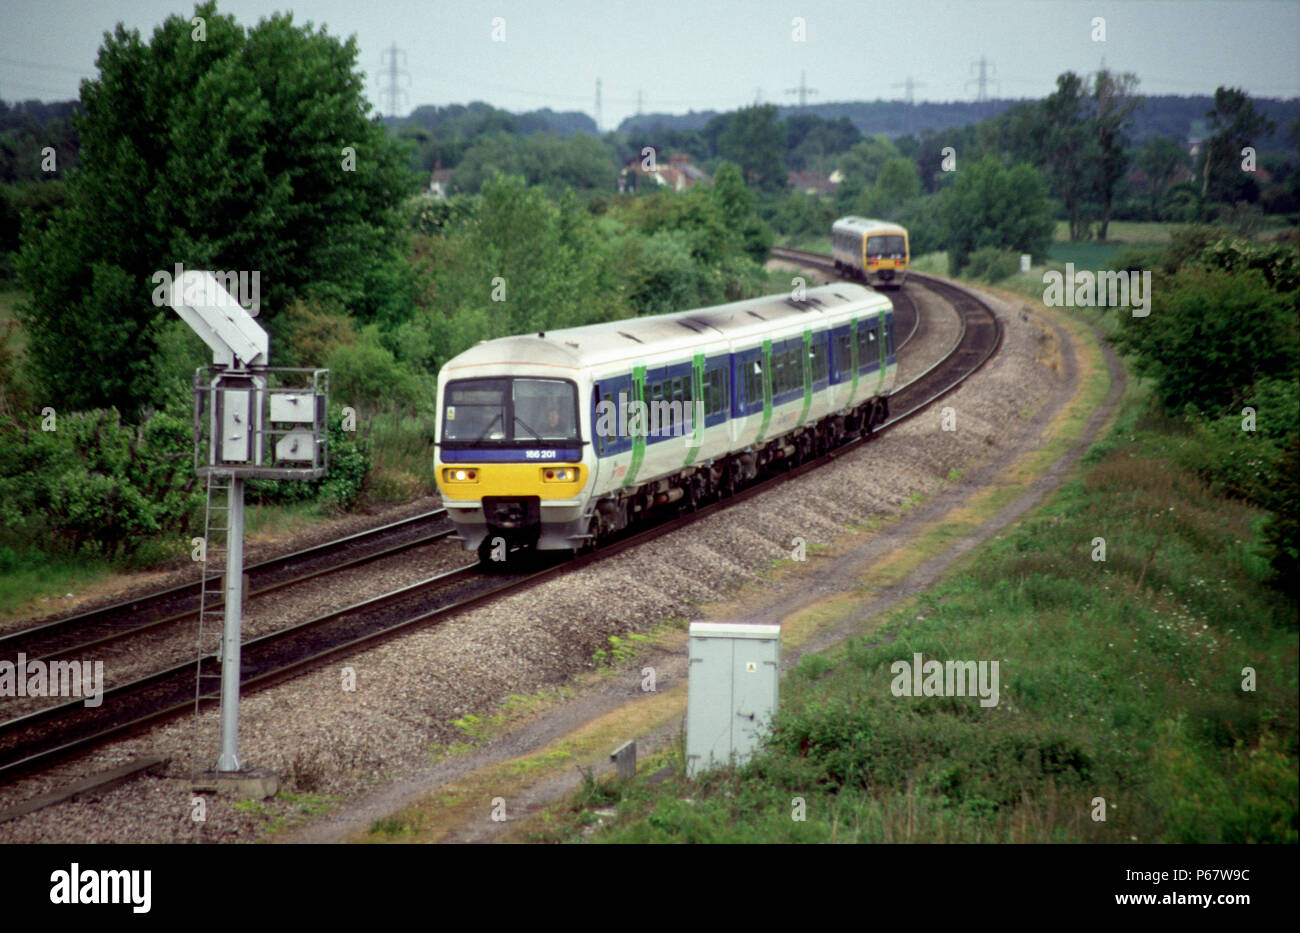 The fleet of Network Turbo Class 165 / 166 DMU trainsets were introduced by Network South East for its suburban services out of Paddington and were su Stock Photo